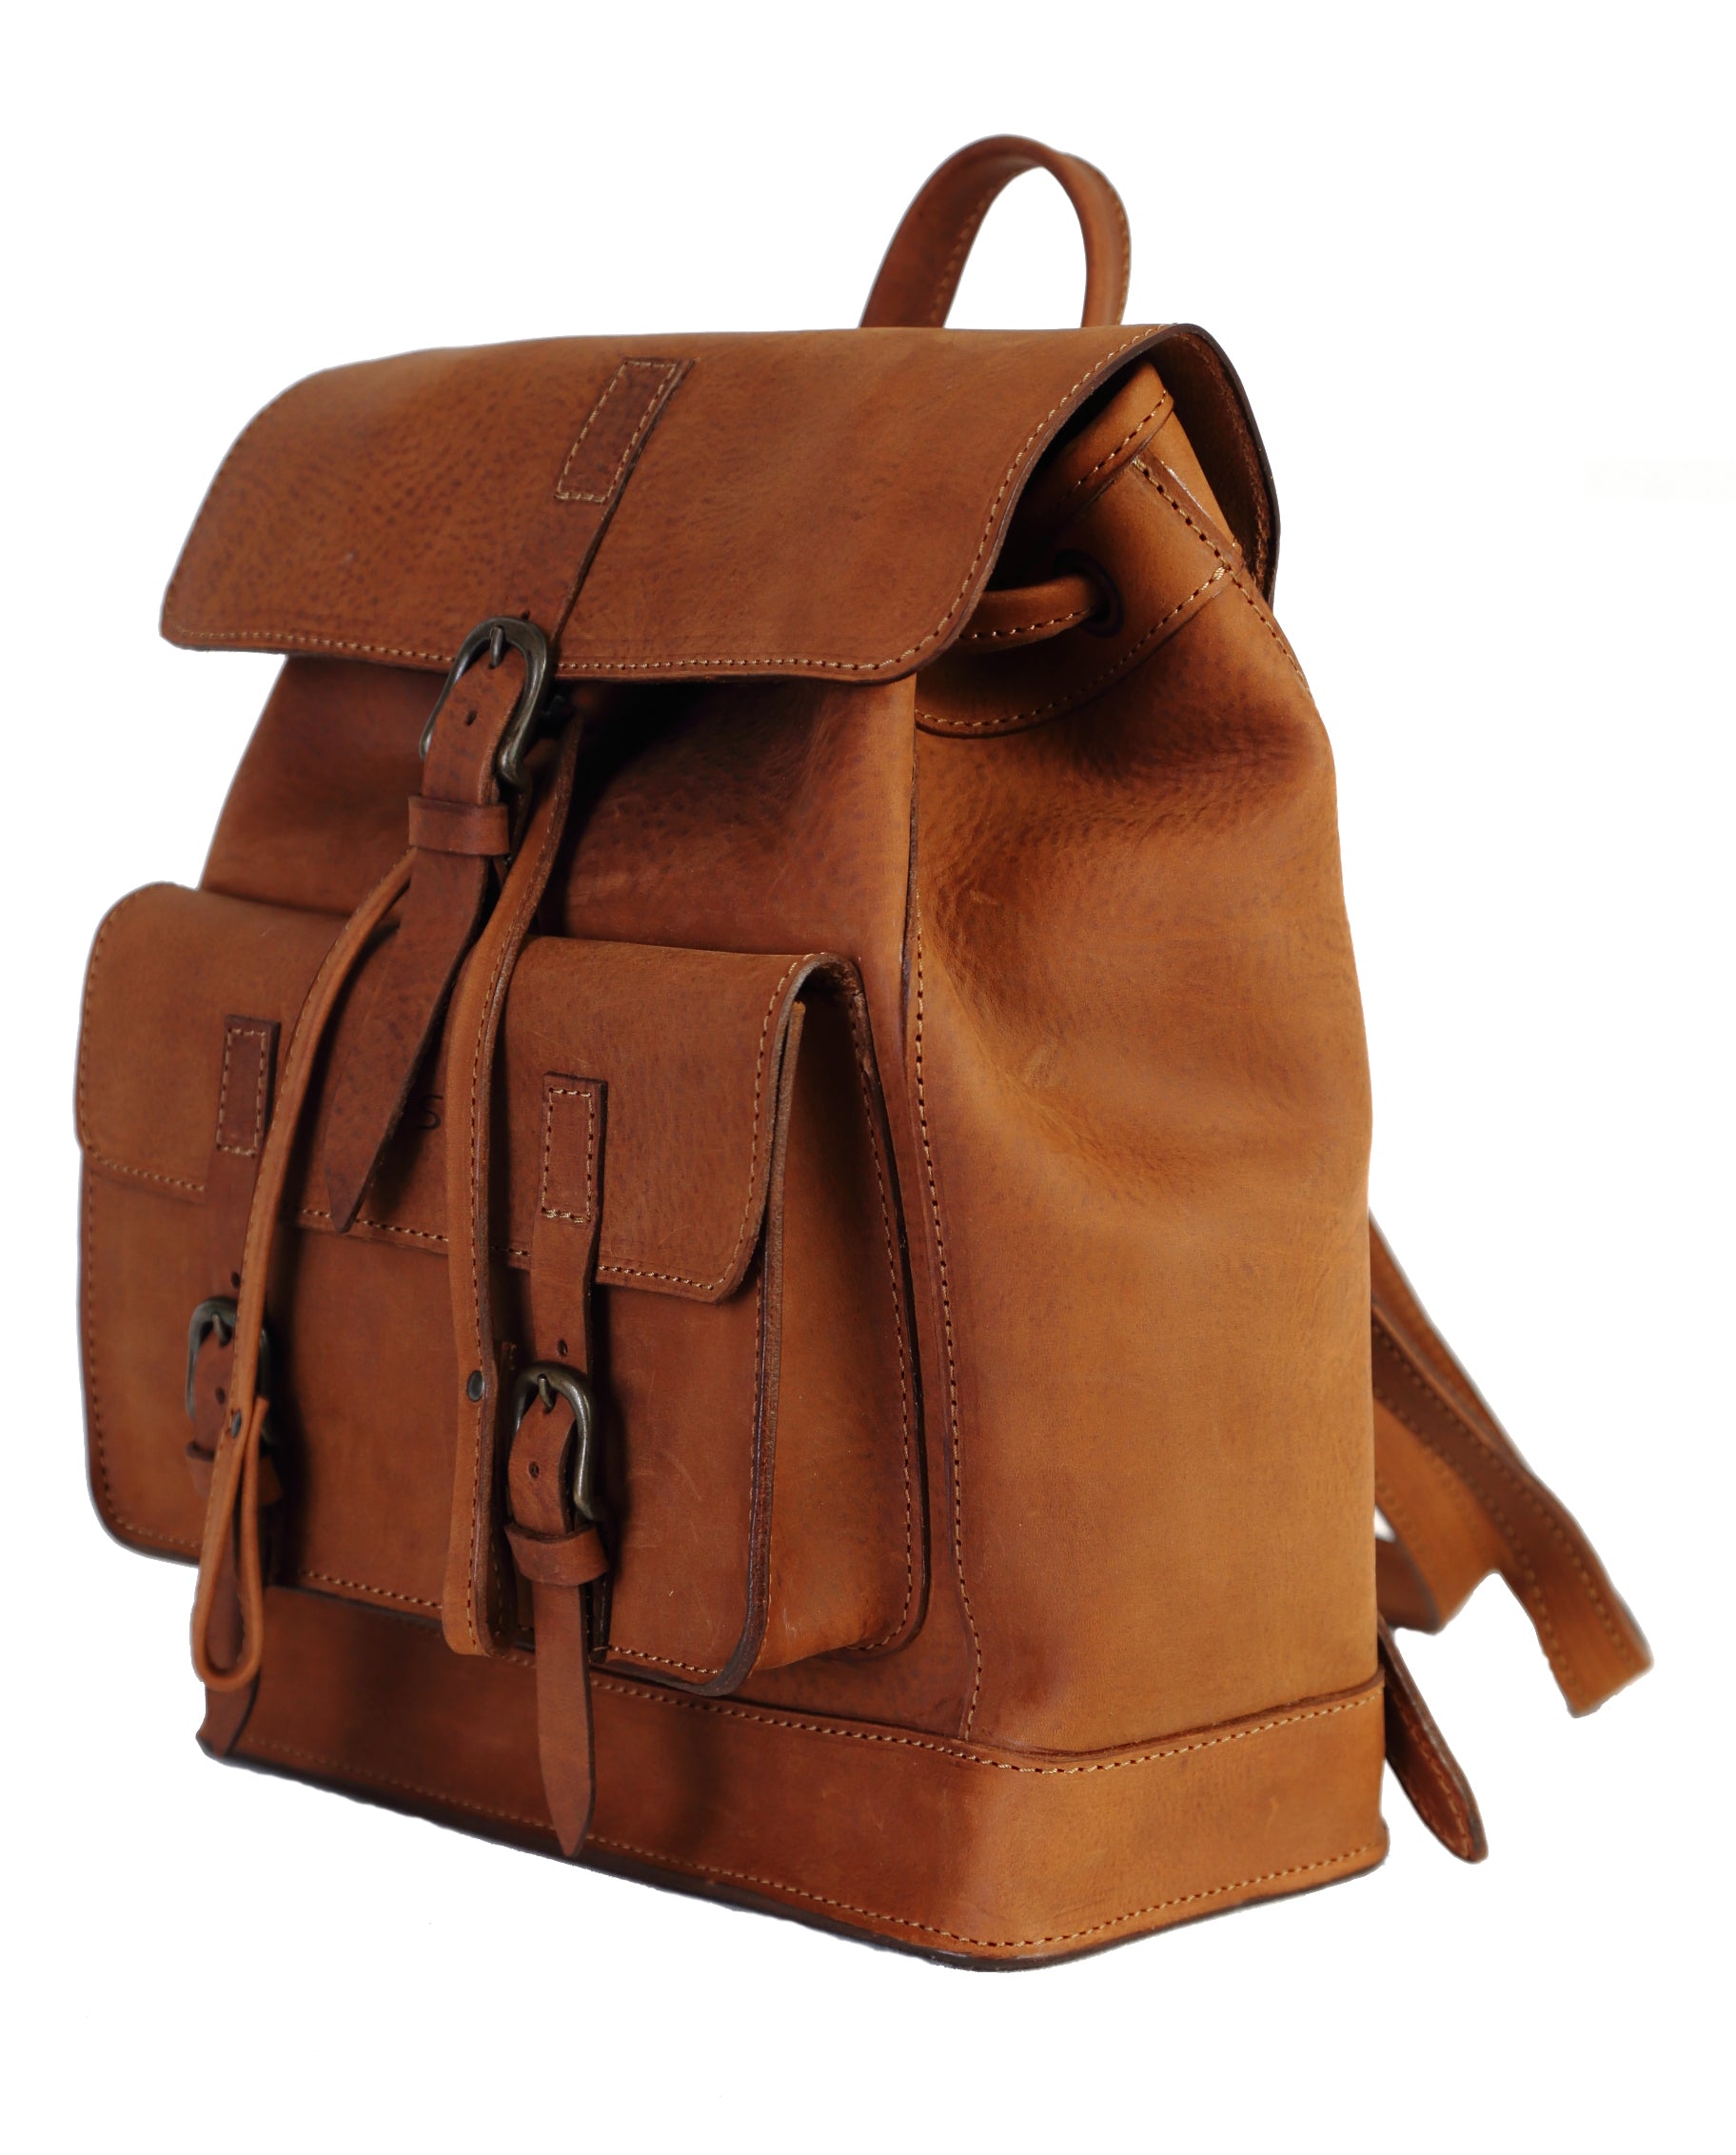 Leather Backpack Heritage Brown The Dust Company su Artisia Store